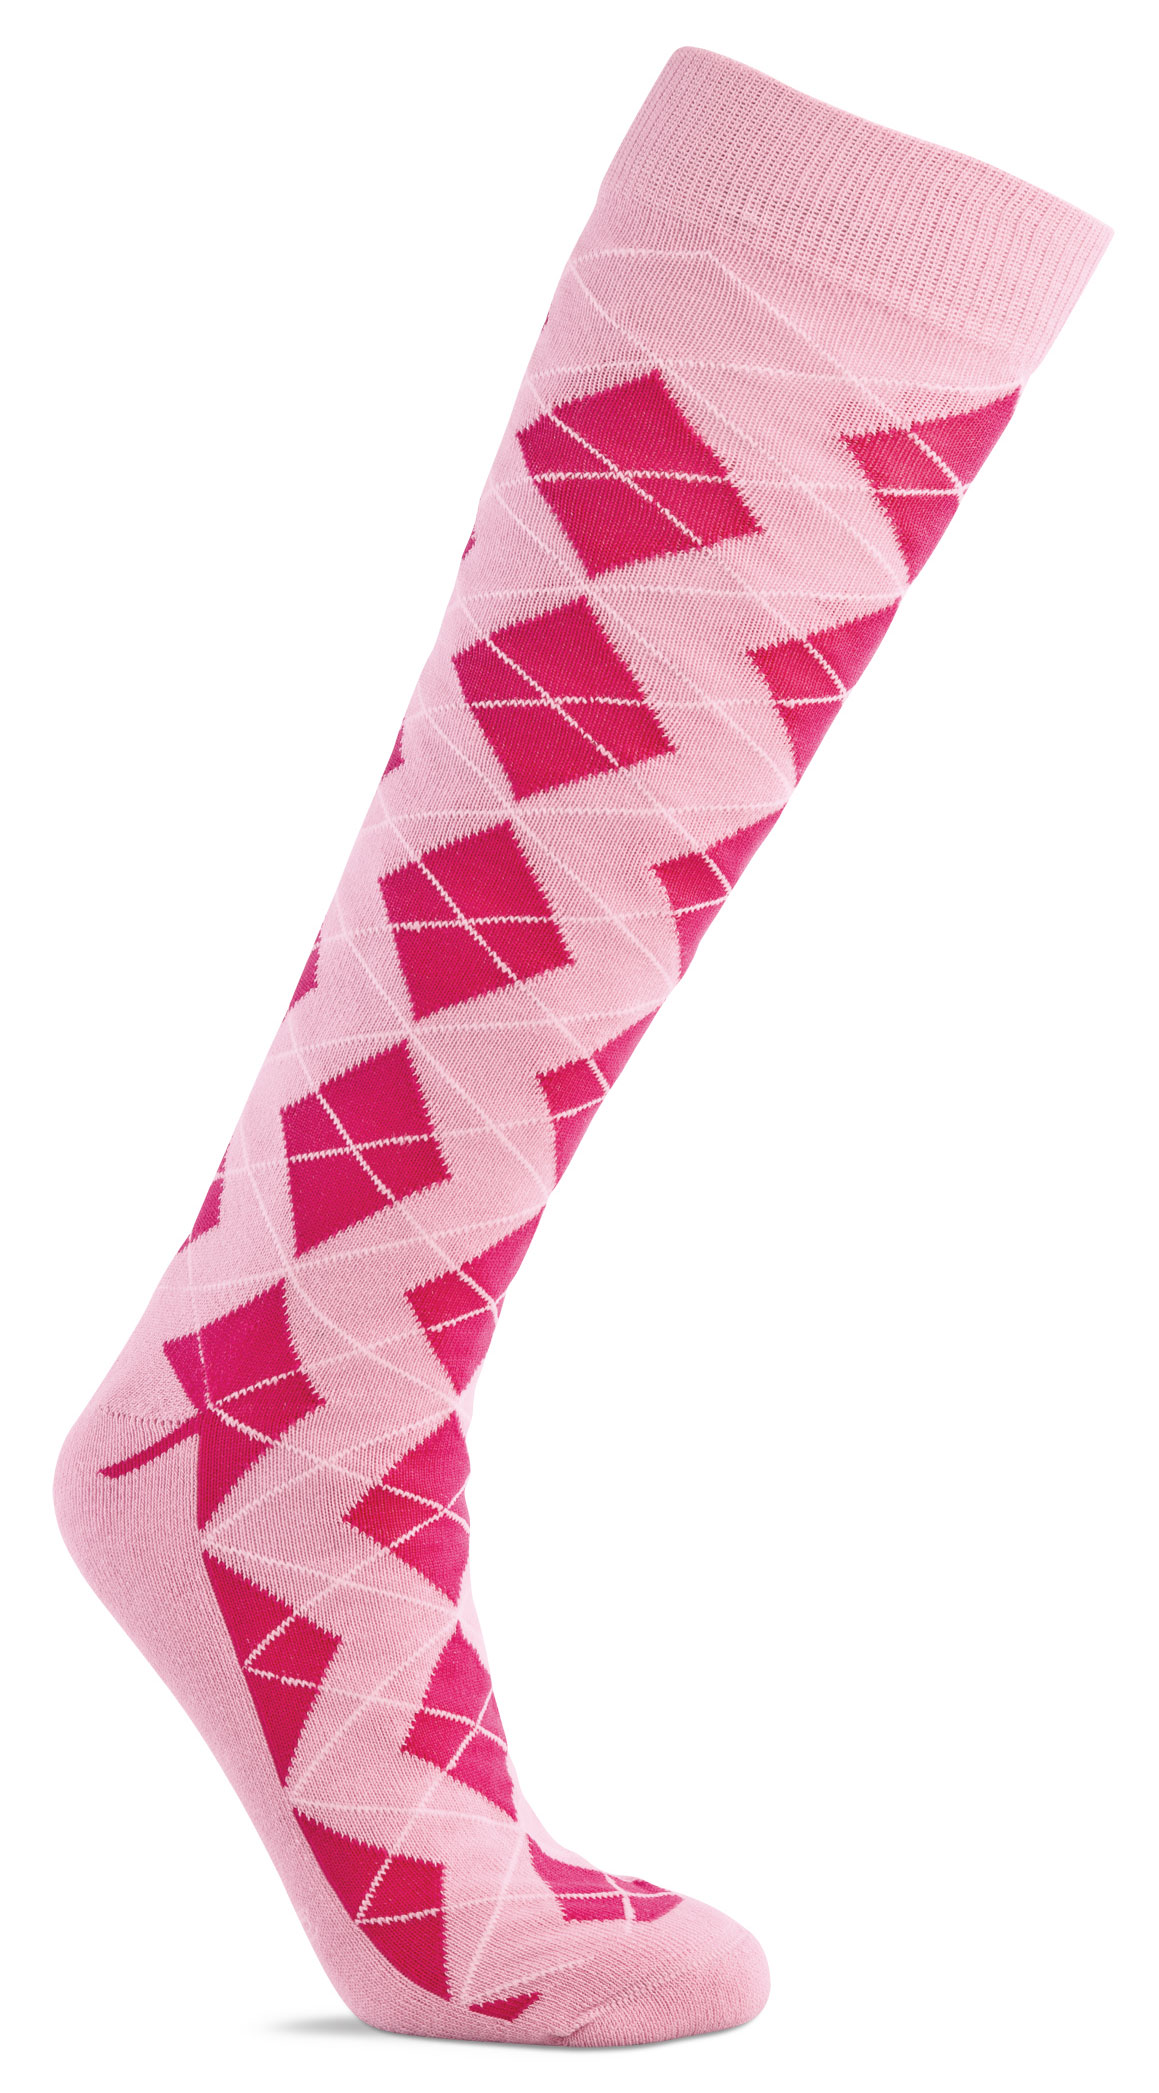 Riding knee socks for children, pink-chequered